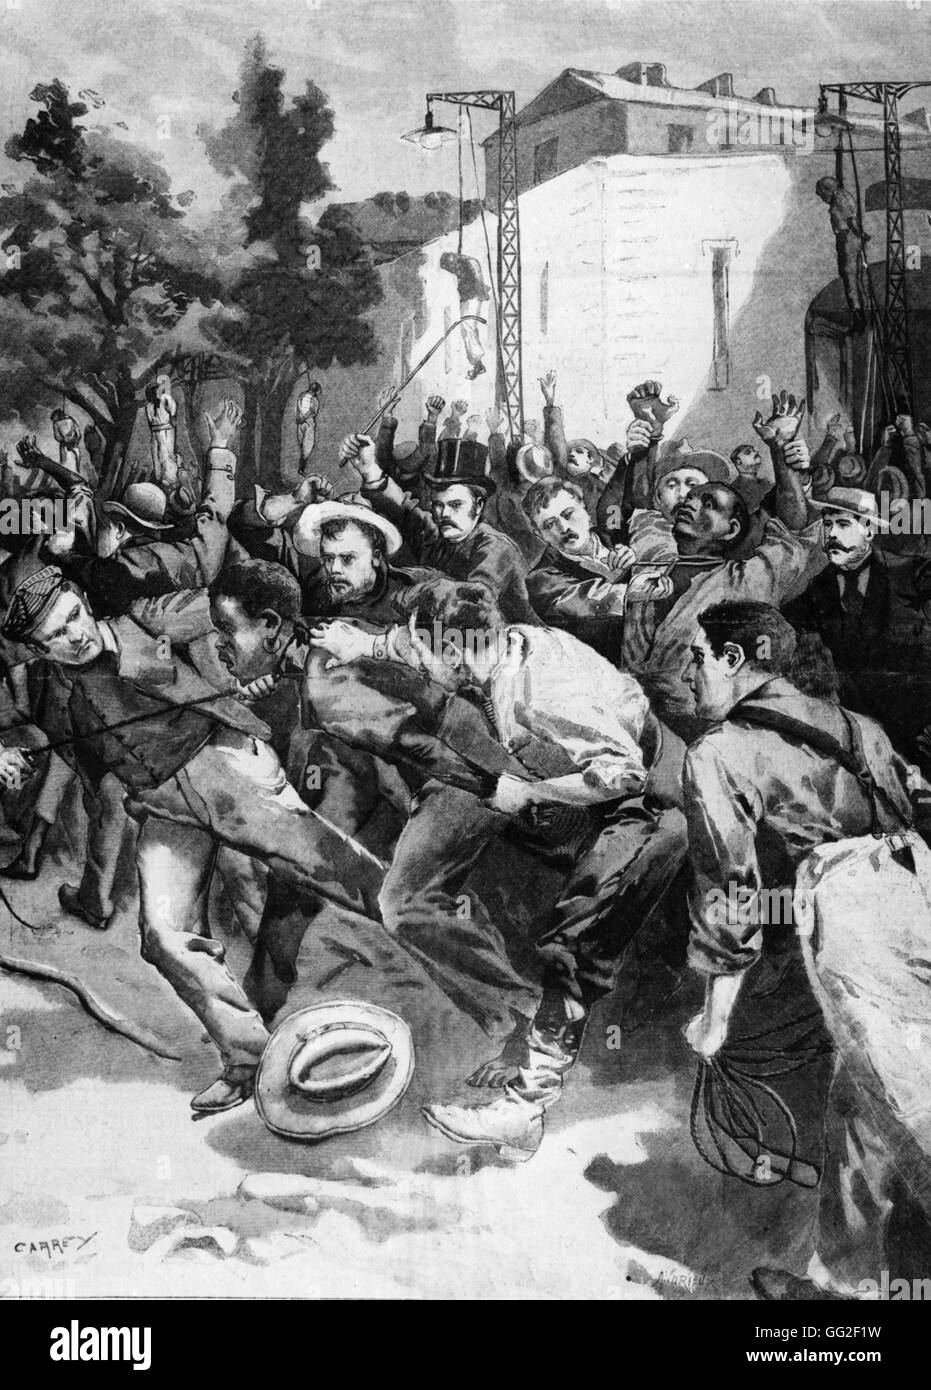 Civilians lynching black people accused of having assassinated a white woman 1848 United States Stock Photo